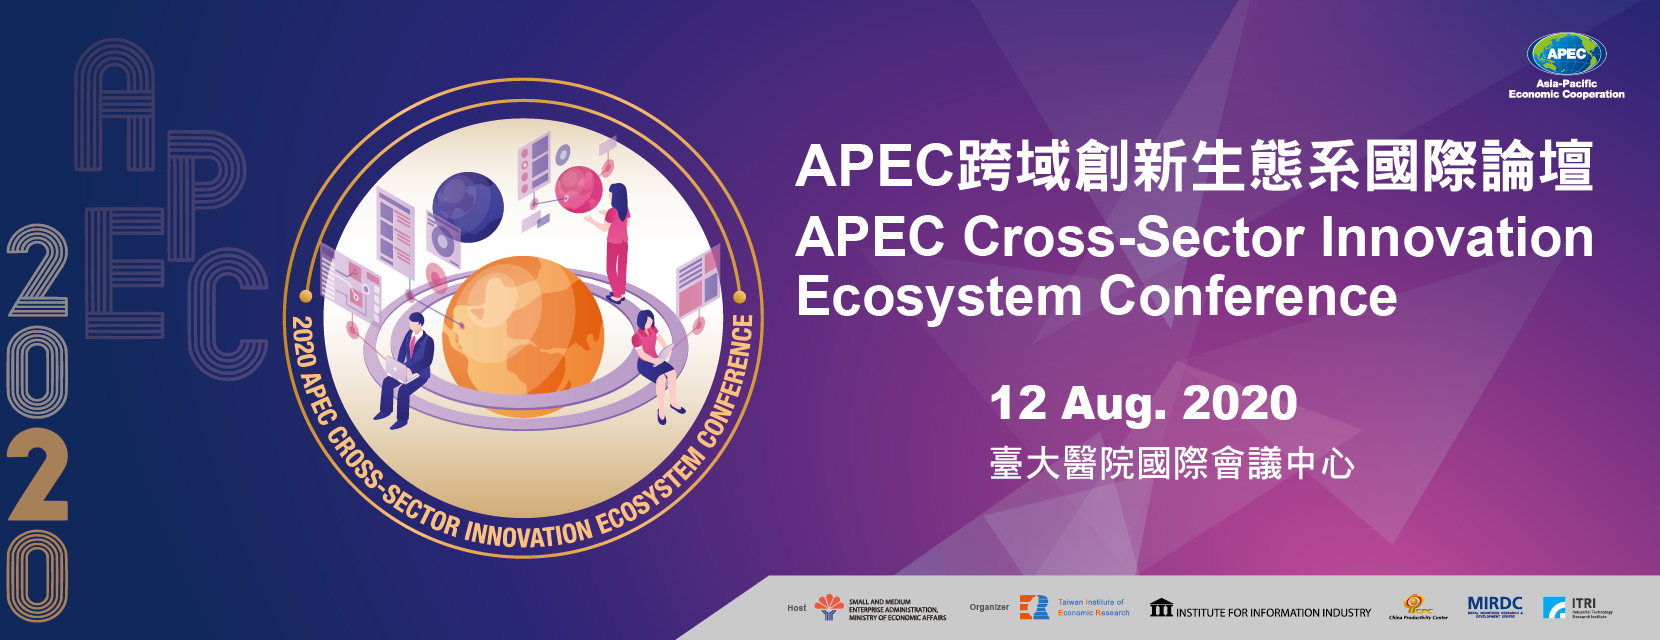 2020 APEC Cross-Sector Innovation Ecosystem Conference